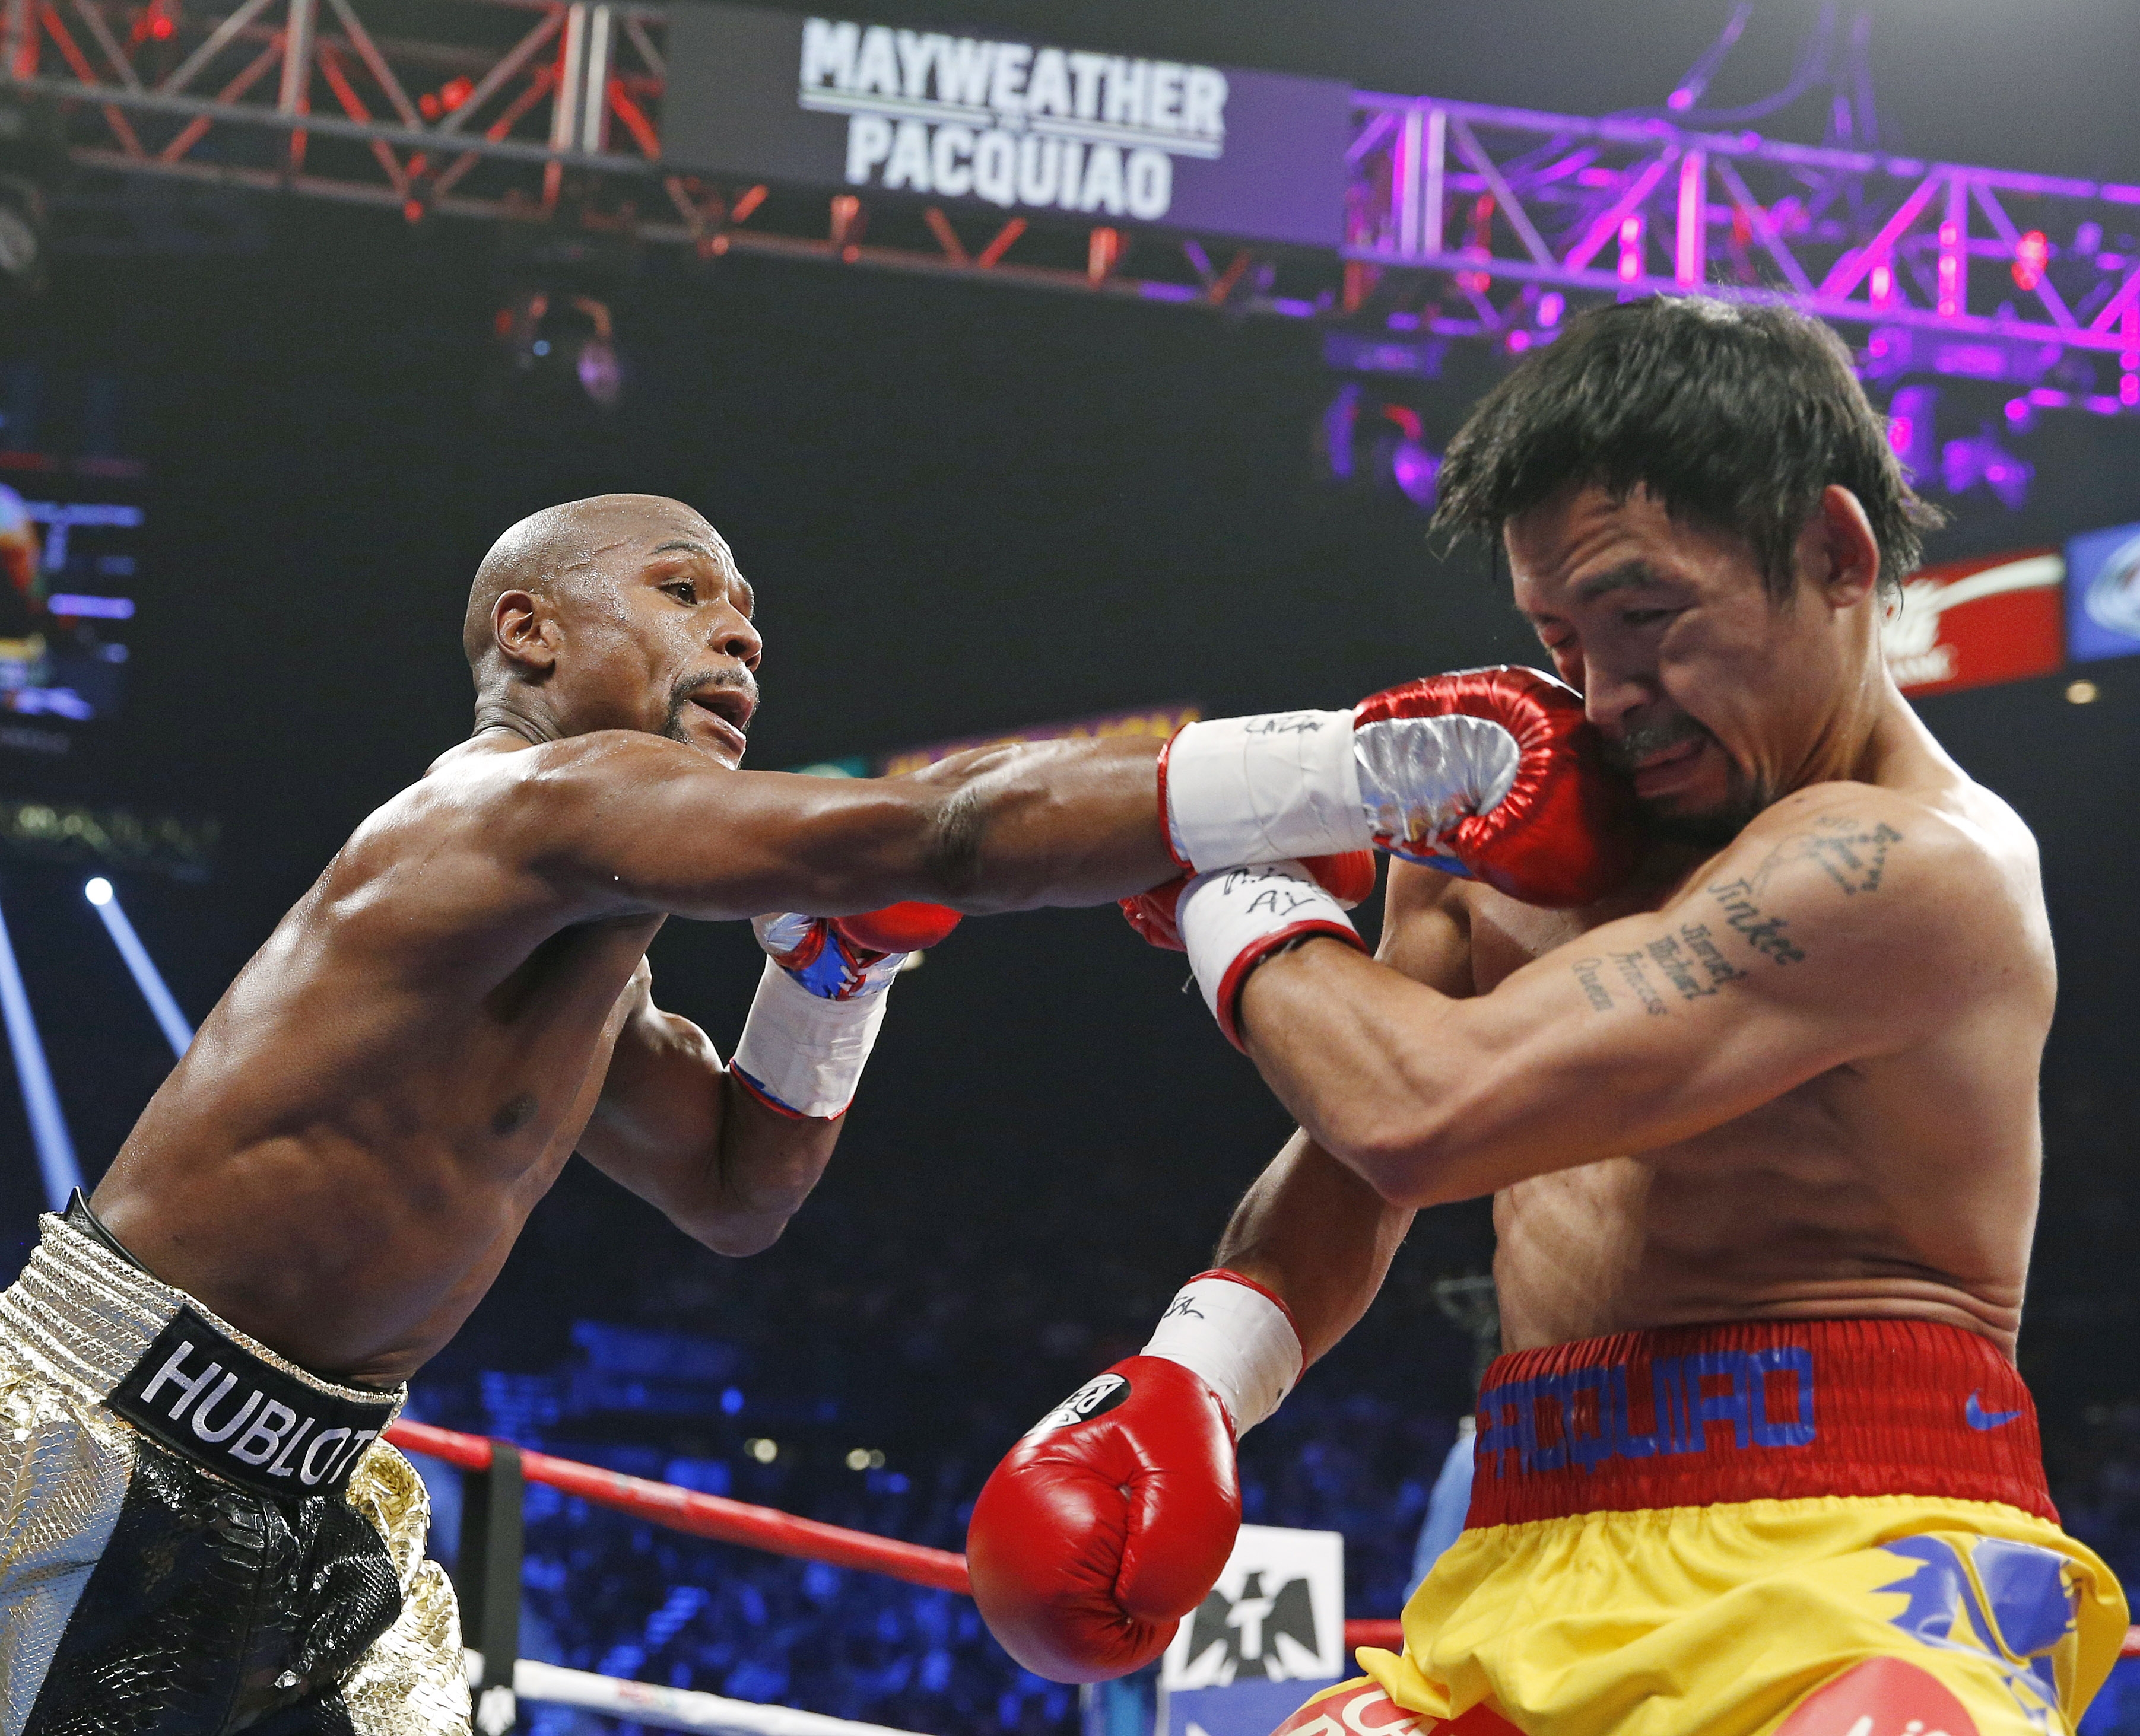 Floyd Mayweather Jr., left, connects with a right to the head of Manny Pacquiao, from the Philippines, on May 2, 2015 in Las Vegas